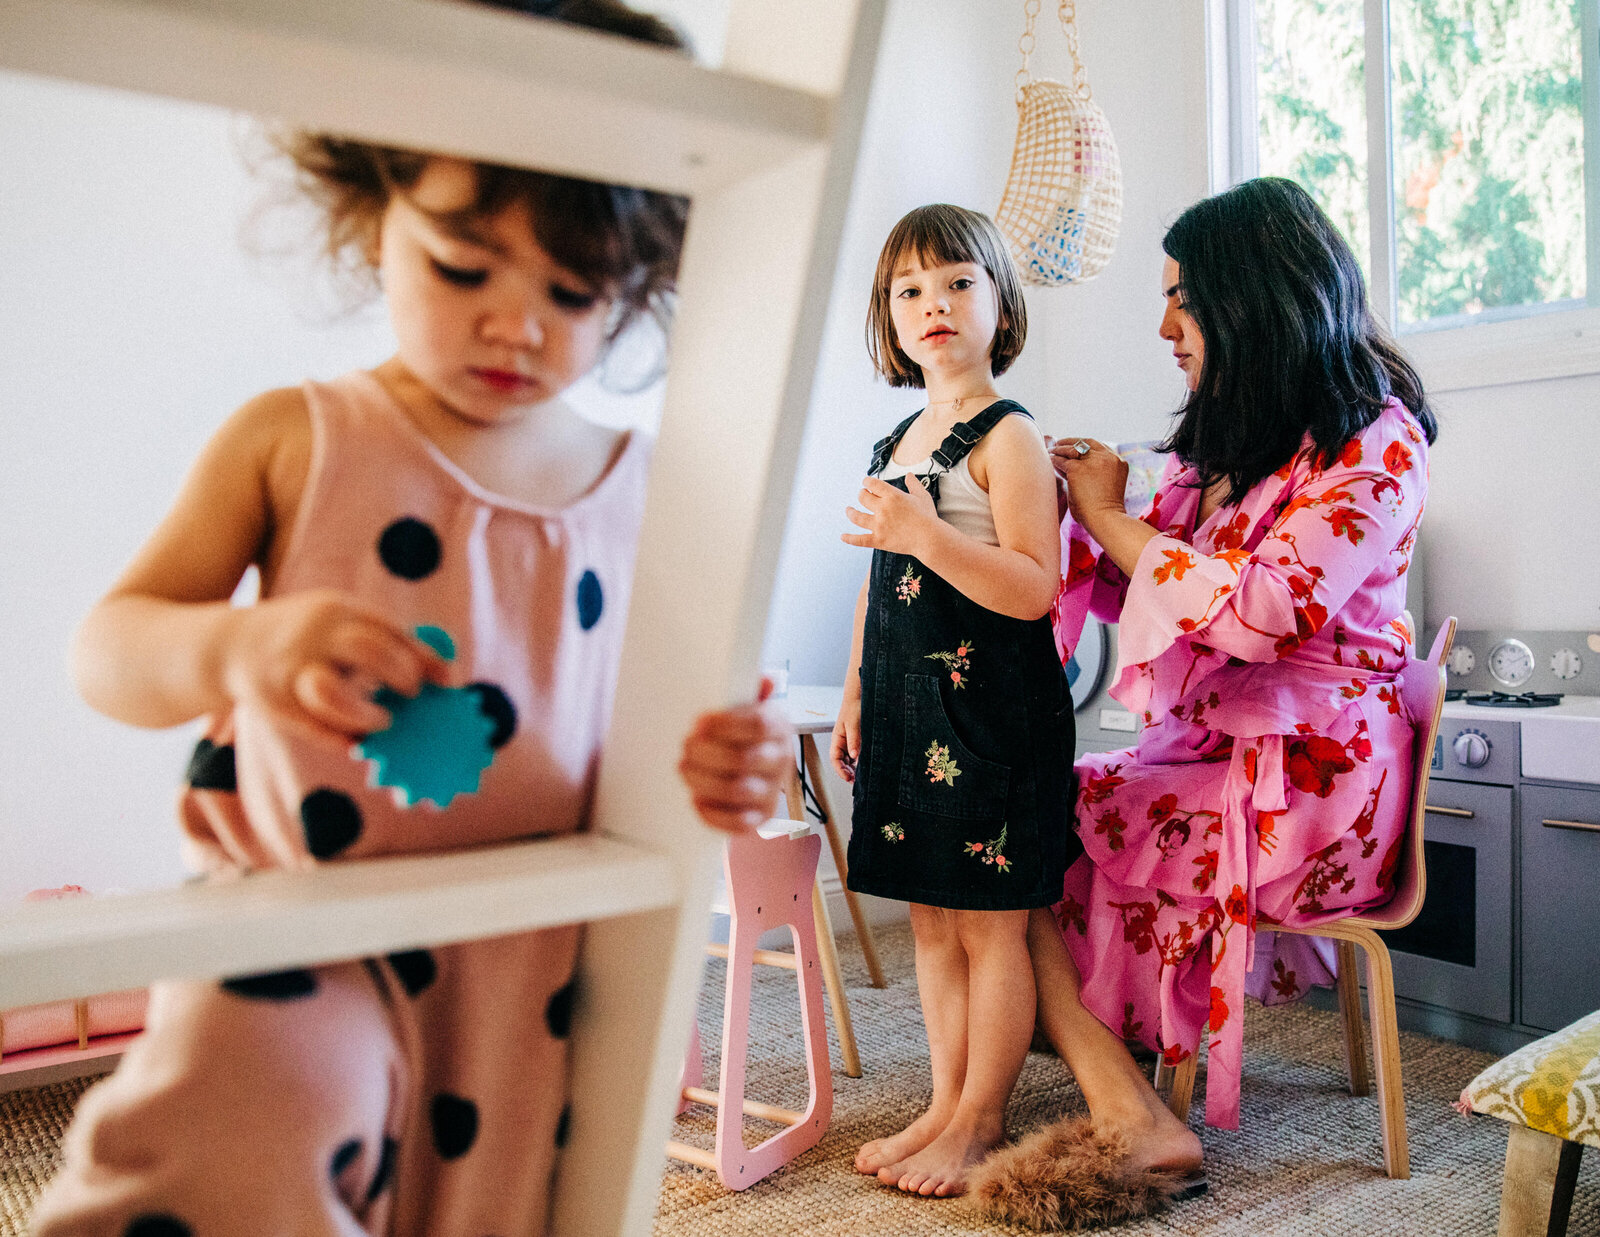 photo of mom in pink dress helping daughter get dressed in black overall dress with younger daughter in the foreground playing on a bunk bed ladder